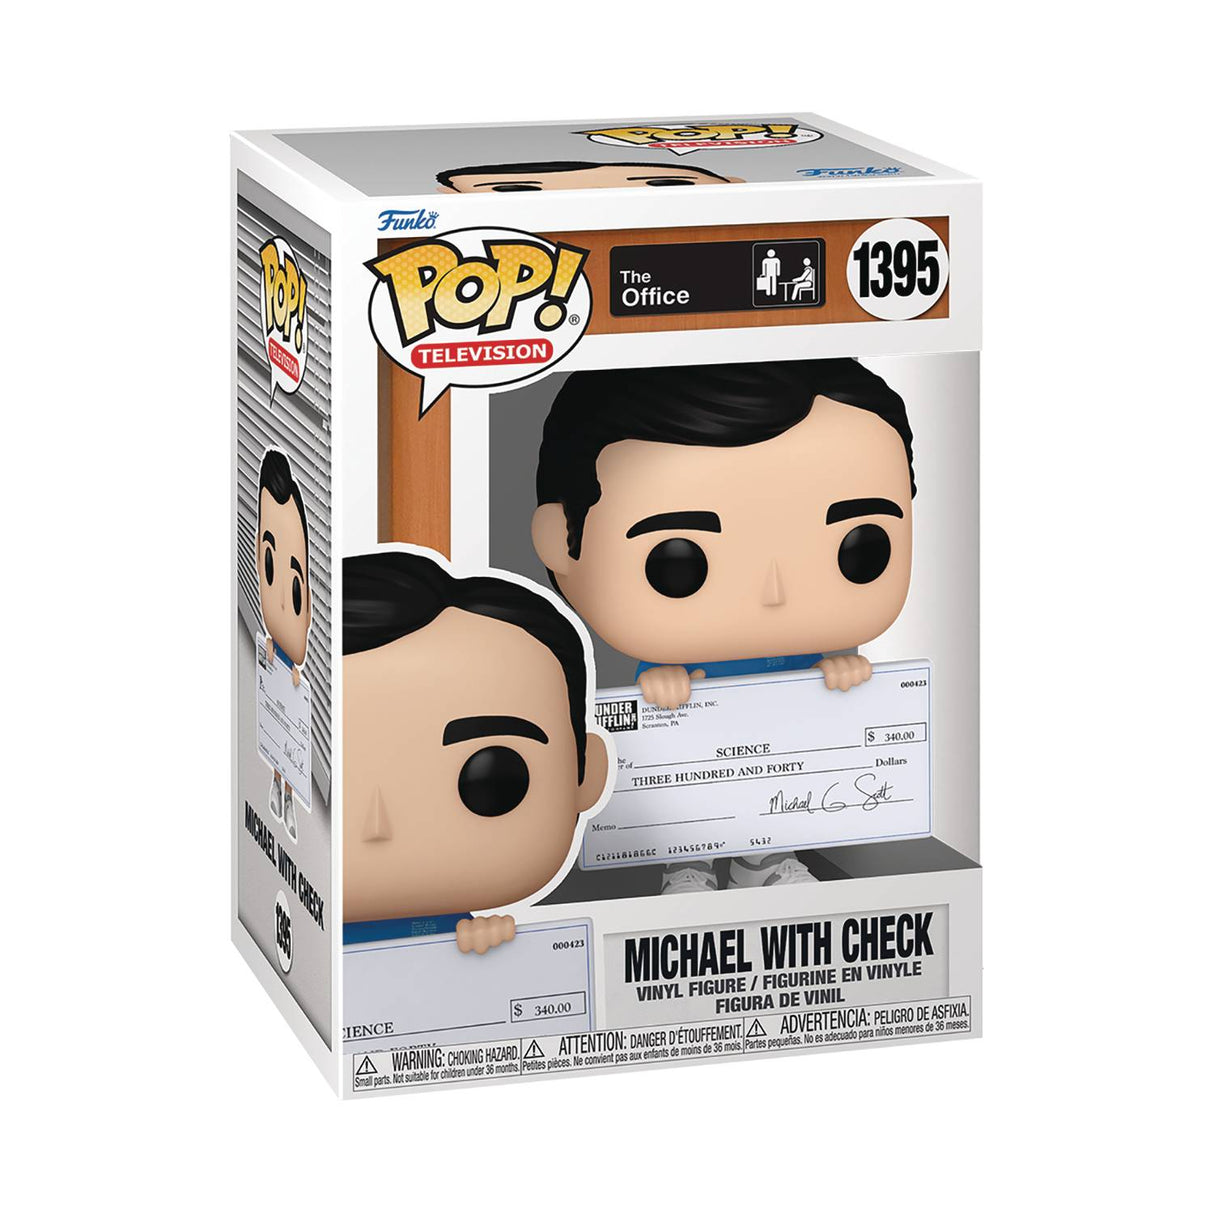 Pop! TV The Office Michael With Check Vinyl Figure